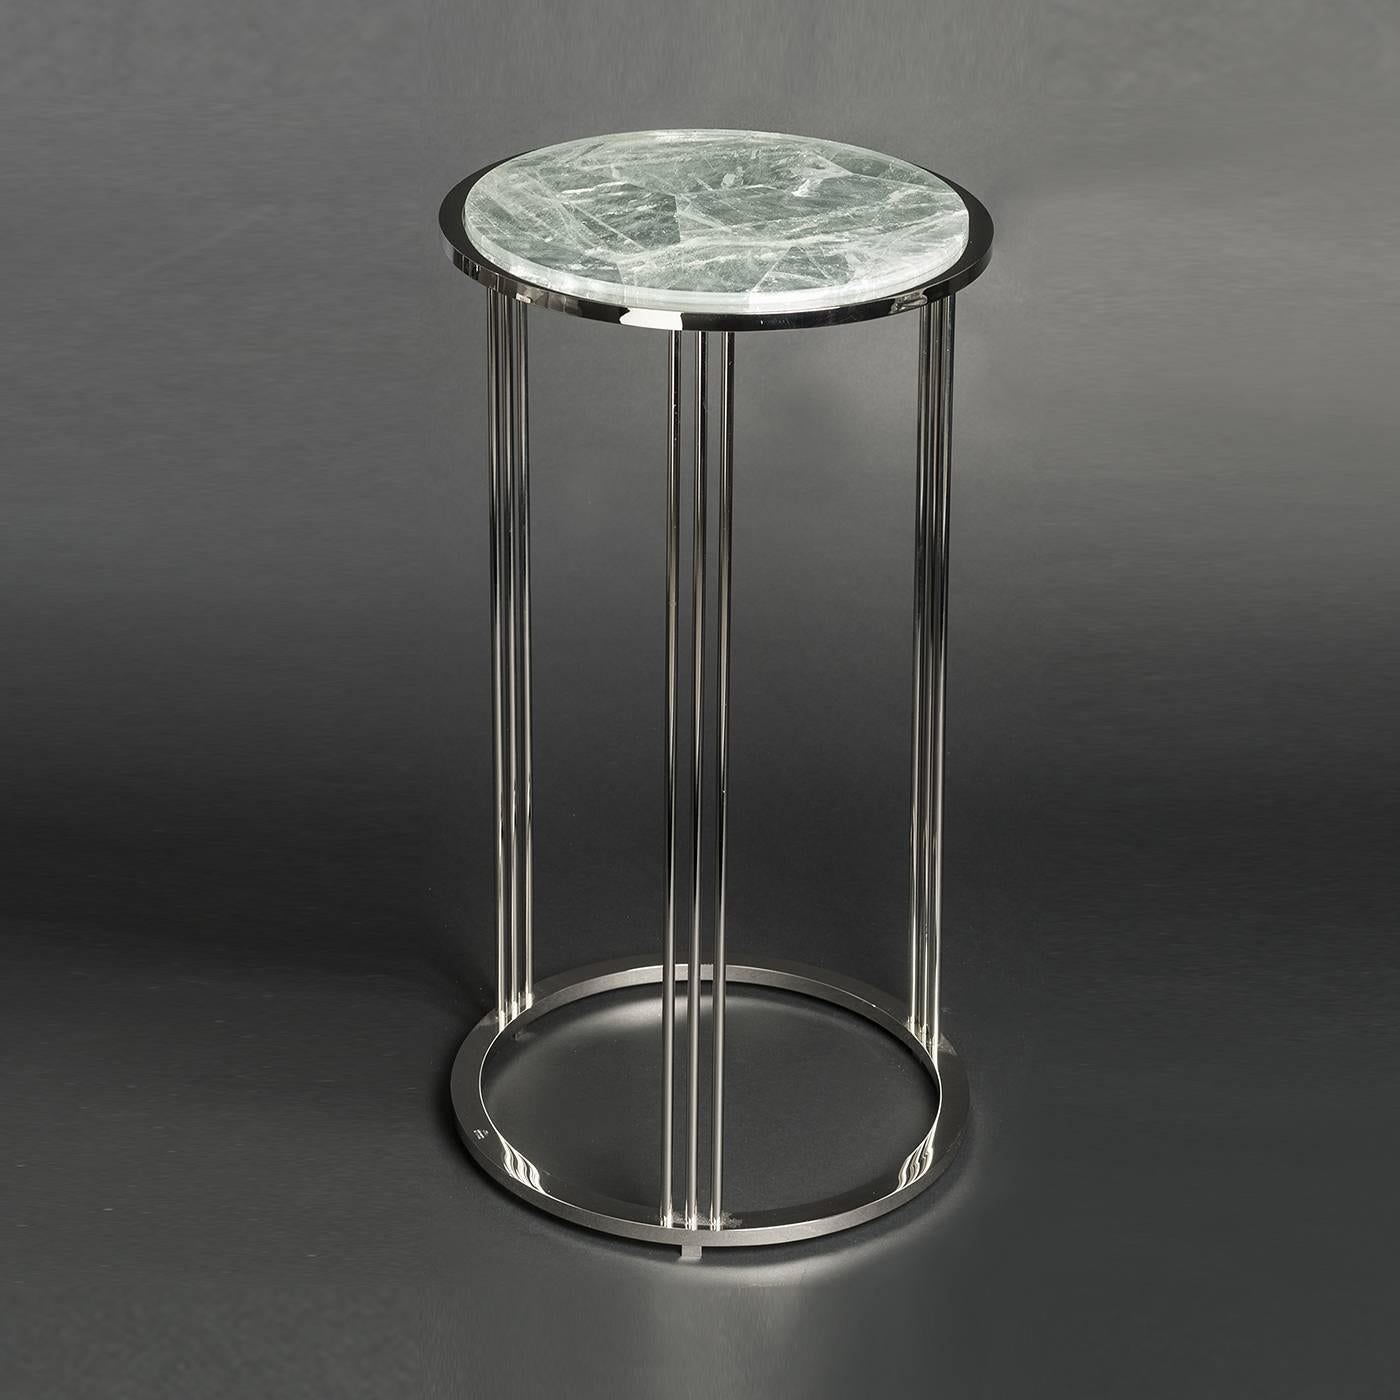 This side table has an elegant yet simple shape comprised of a structure in brass with lustrous nickel plating and a round top in-bedded into the frame in cut Brazilian hyaline quartz. This piece is entirely handmade. The size and metal color of